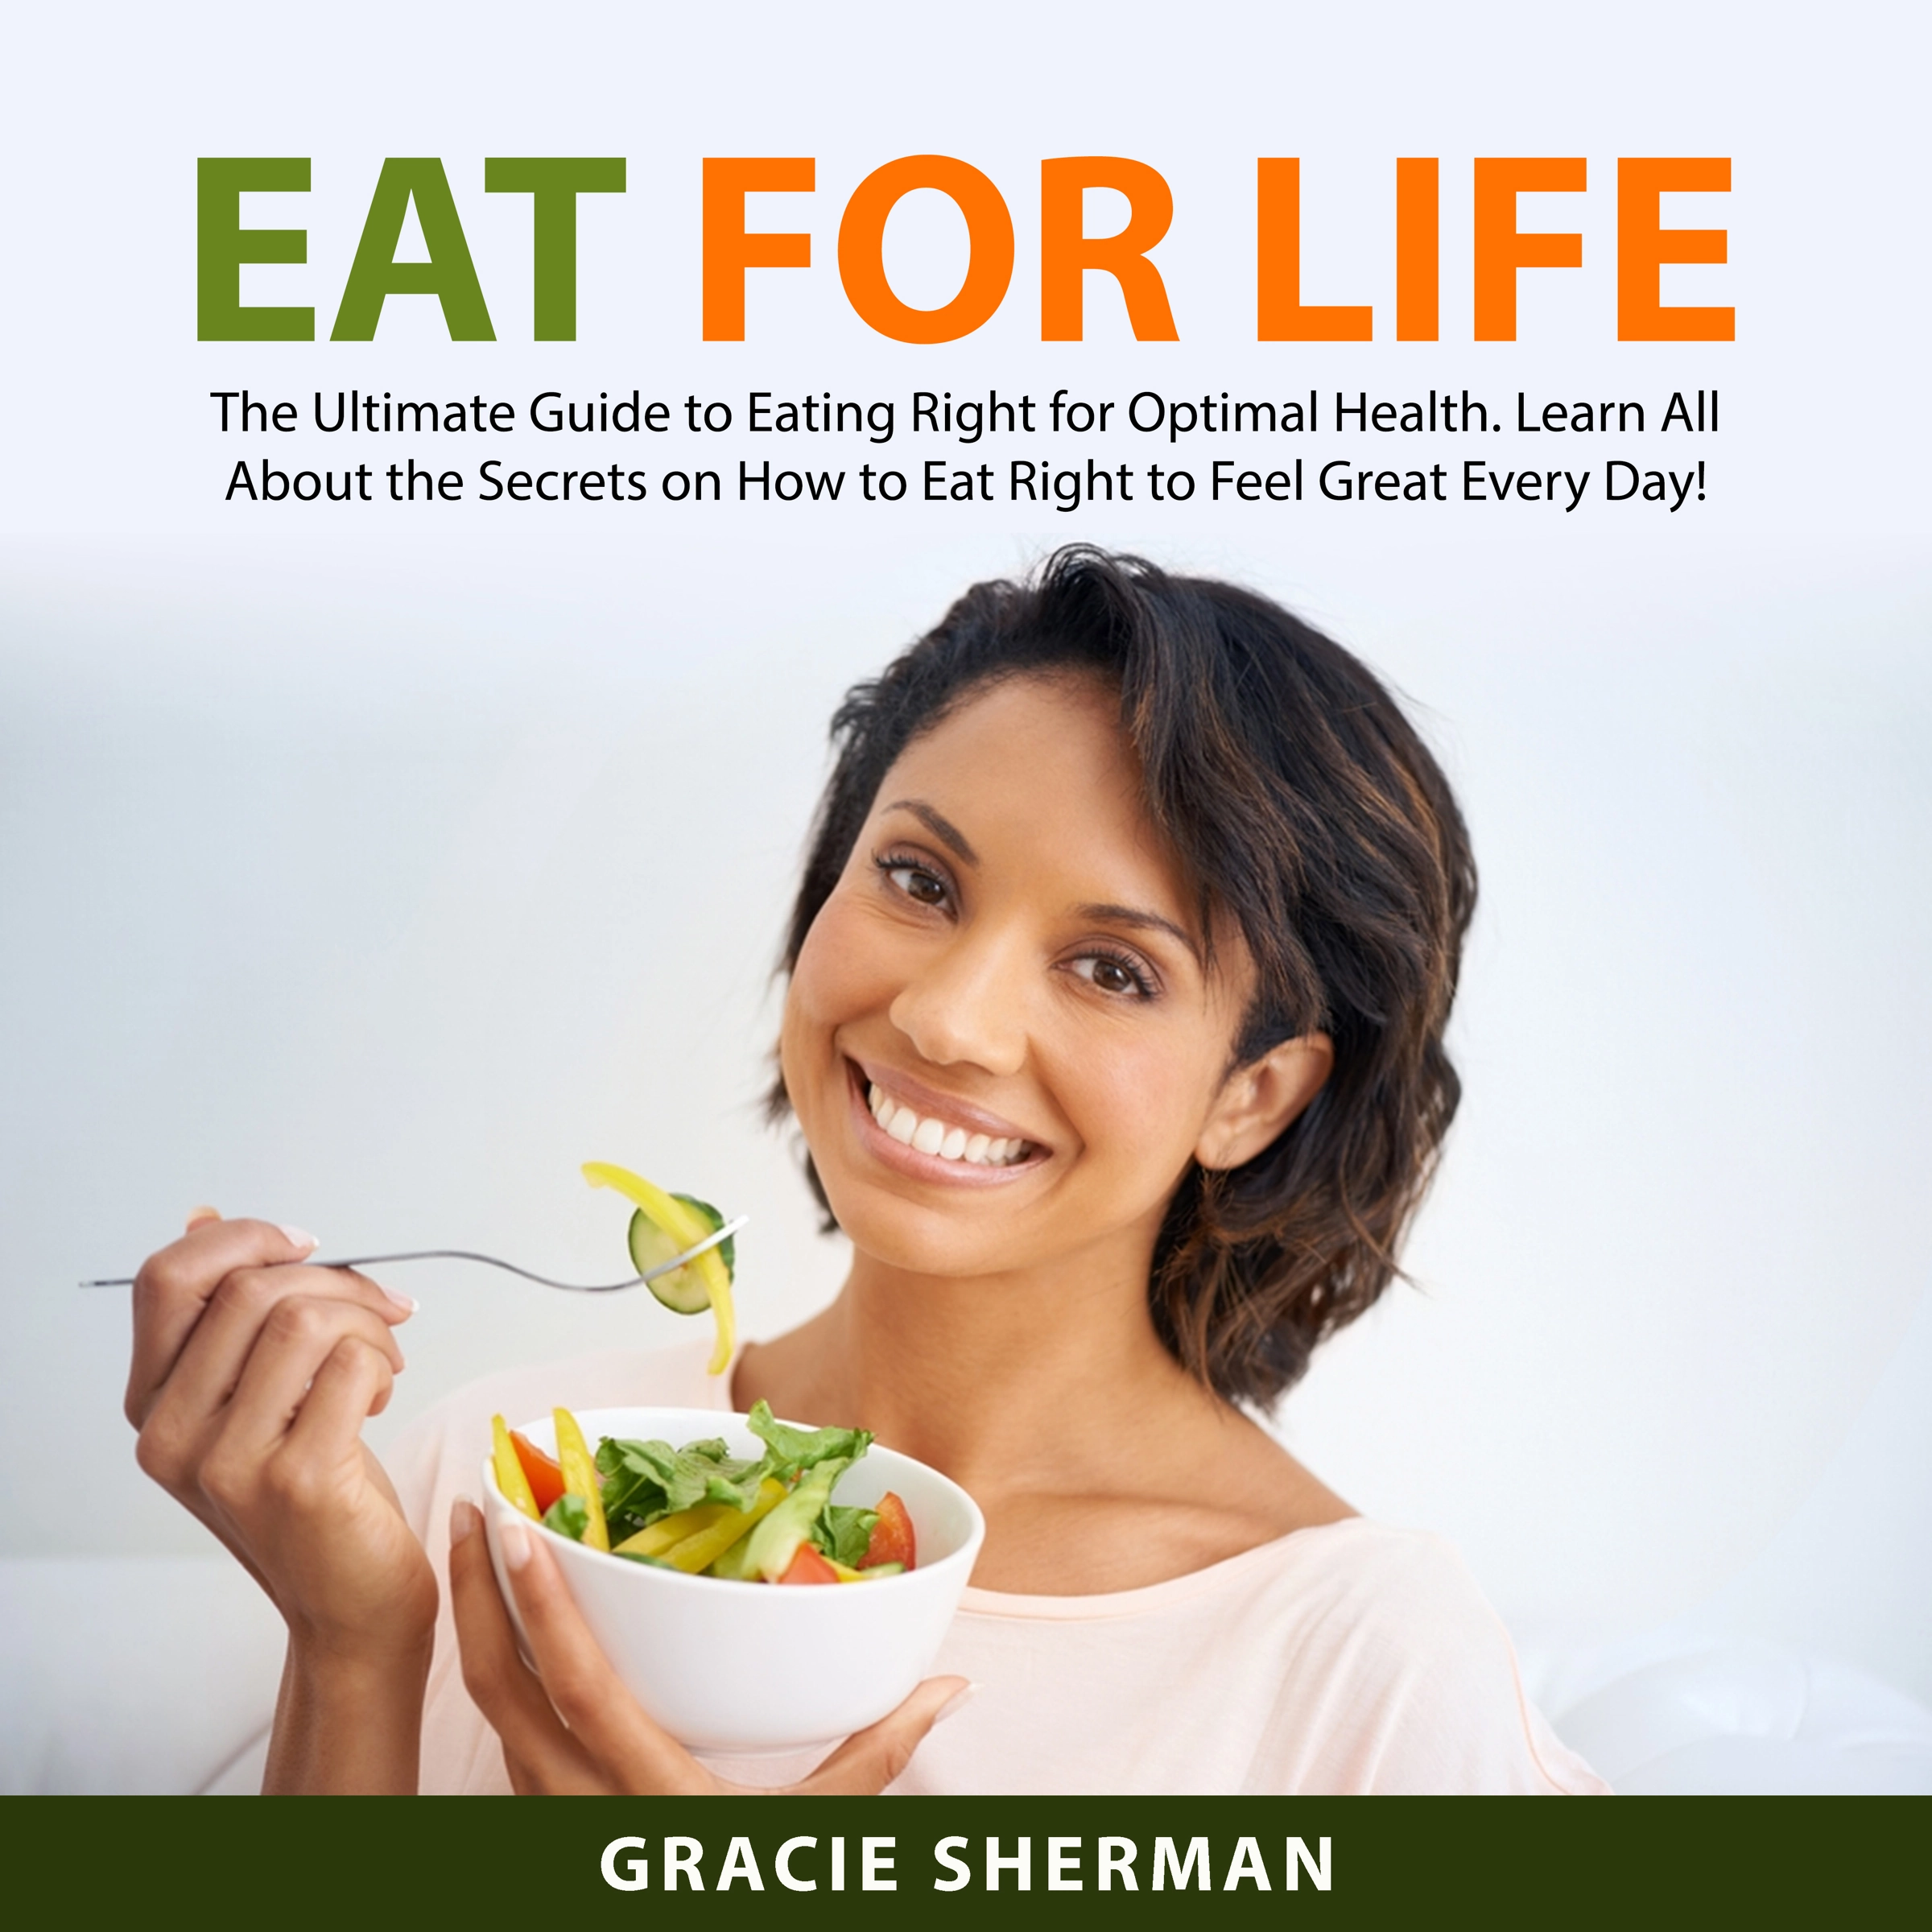 Eat for Life Audiobook by Gracie Sherman